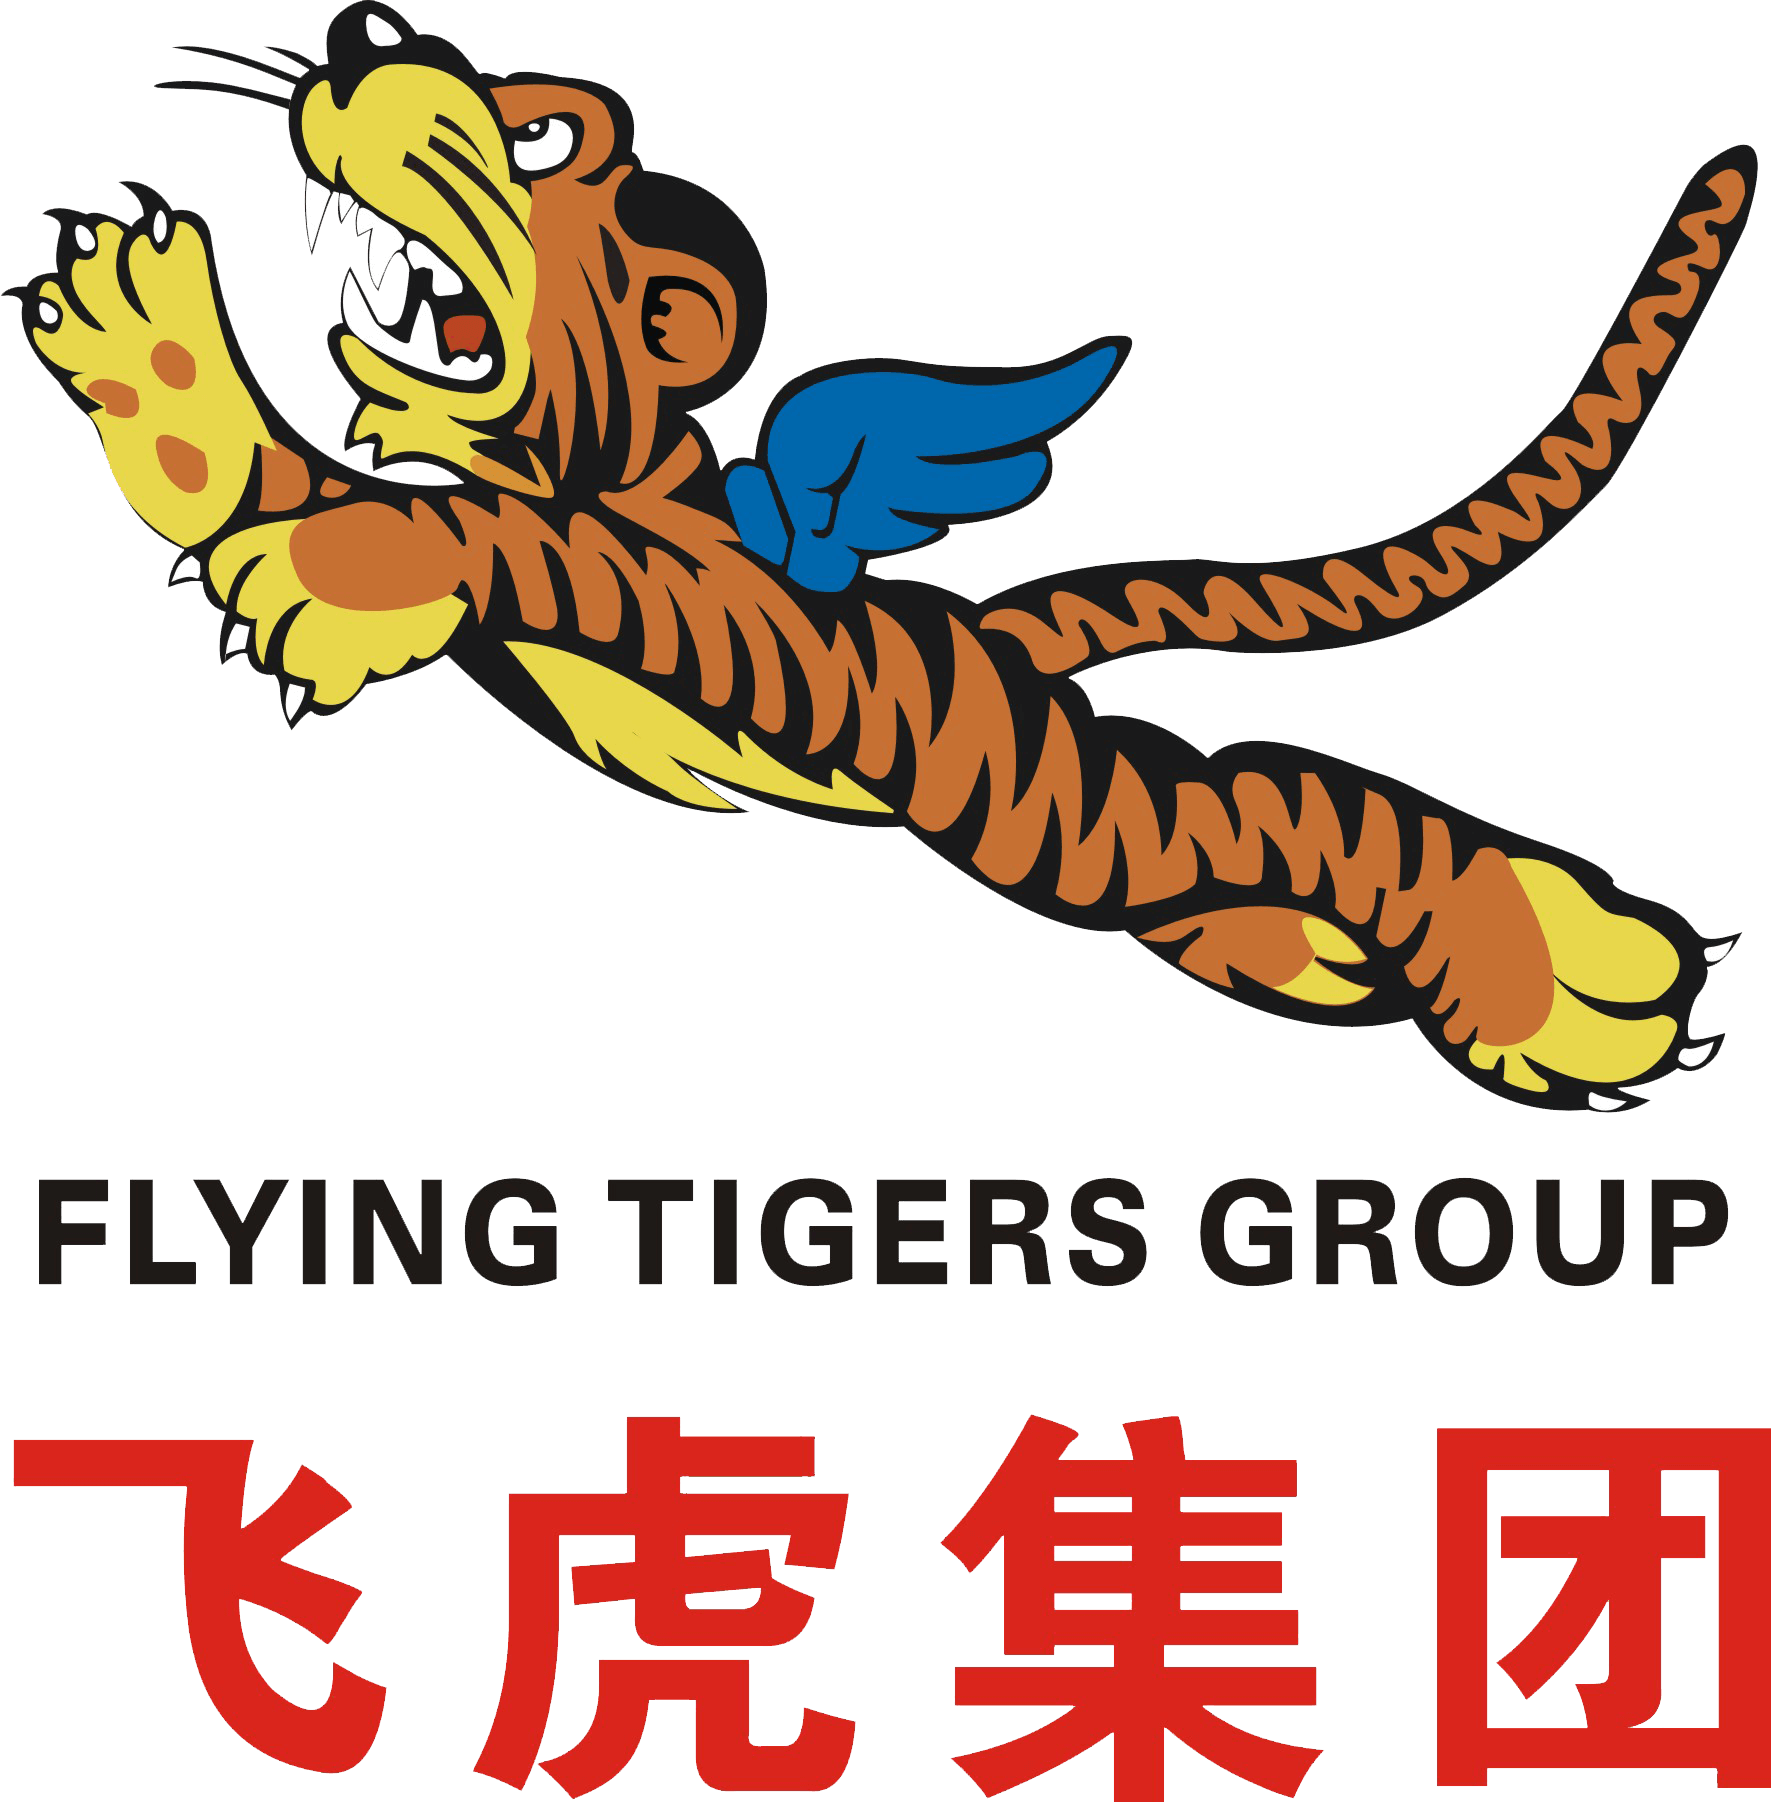 The 18th anniversary of Flying Tigers Group